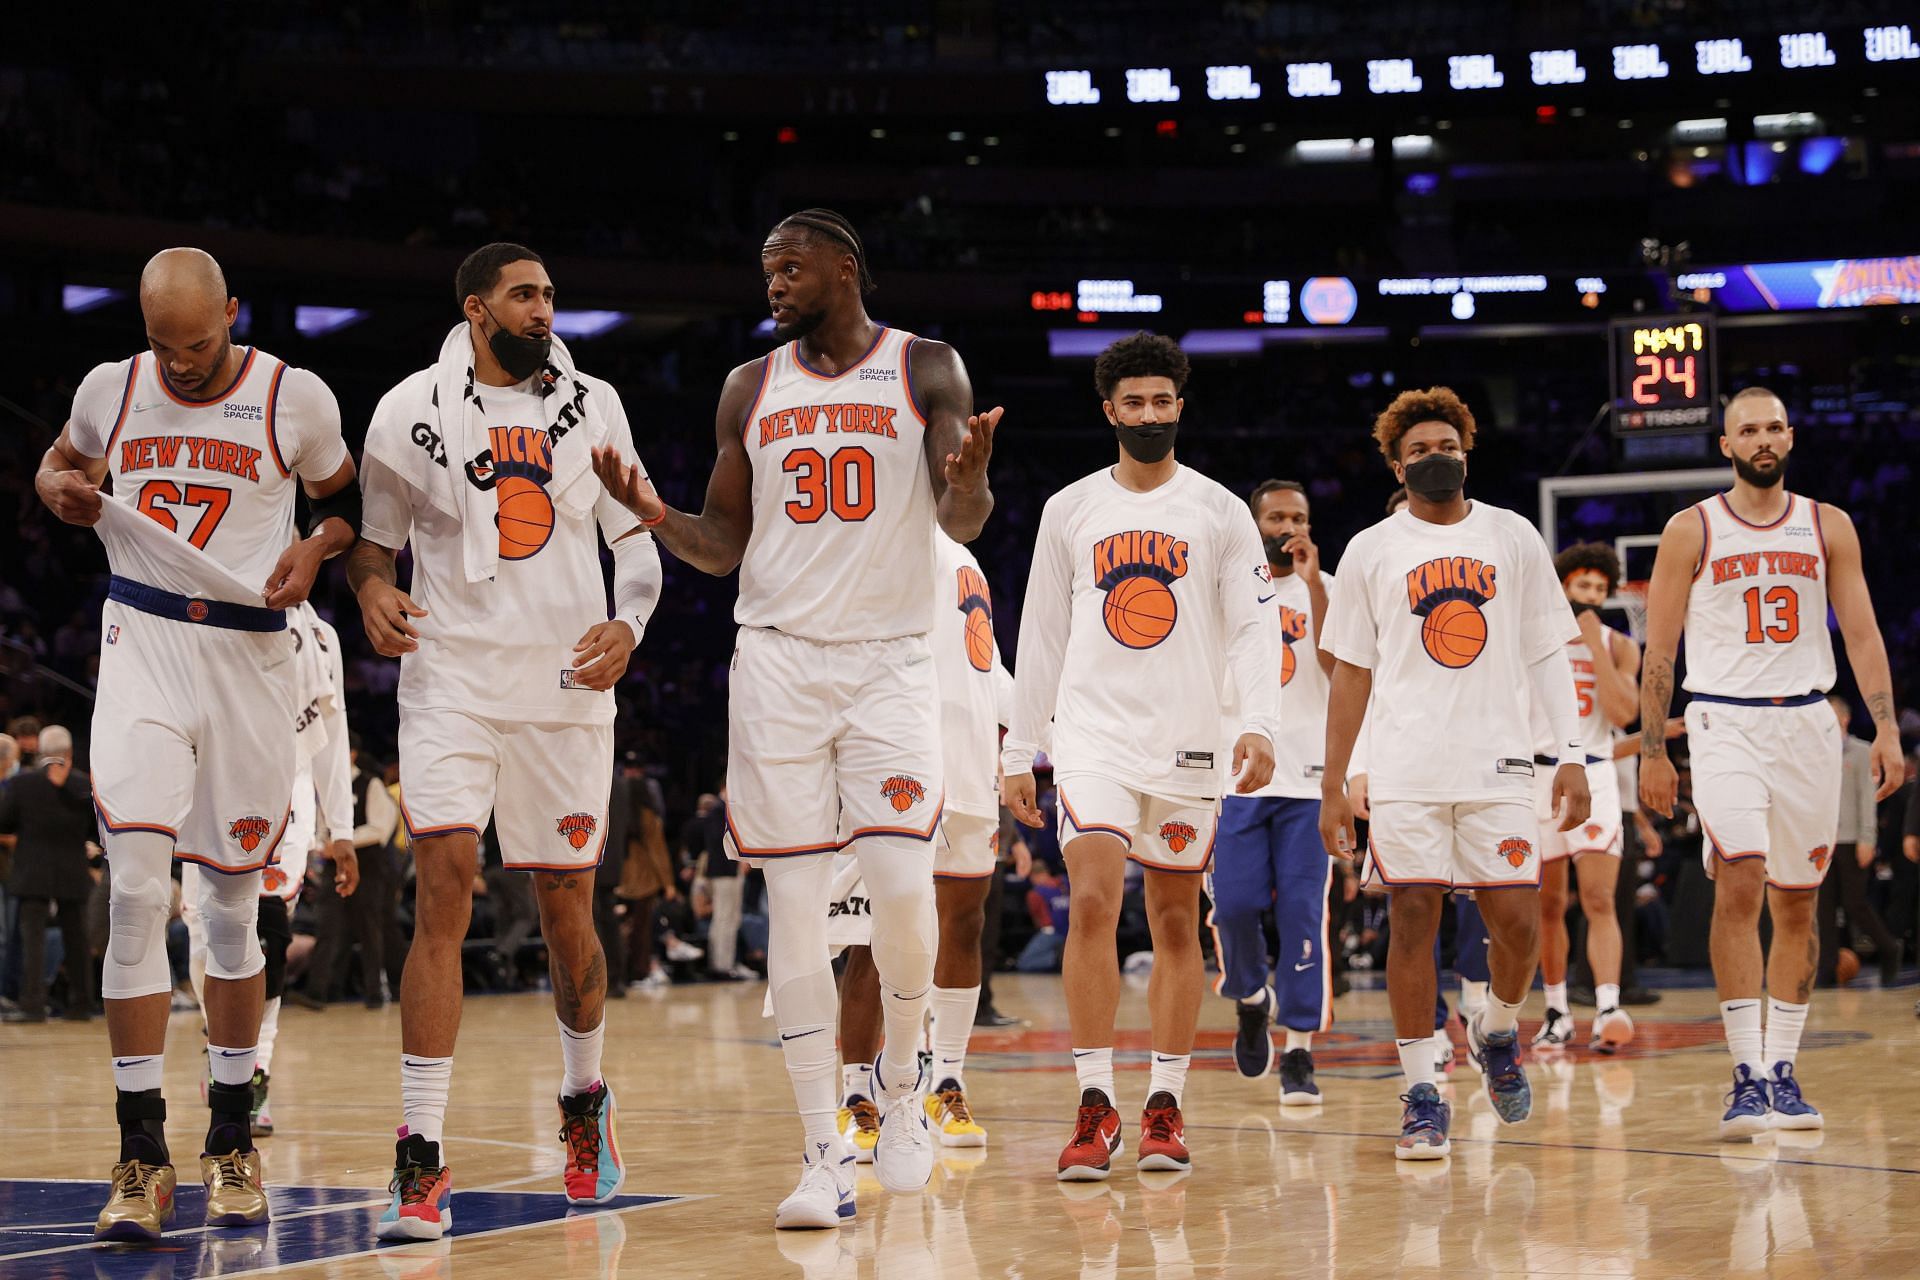 Players of the New York Knicks.